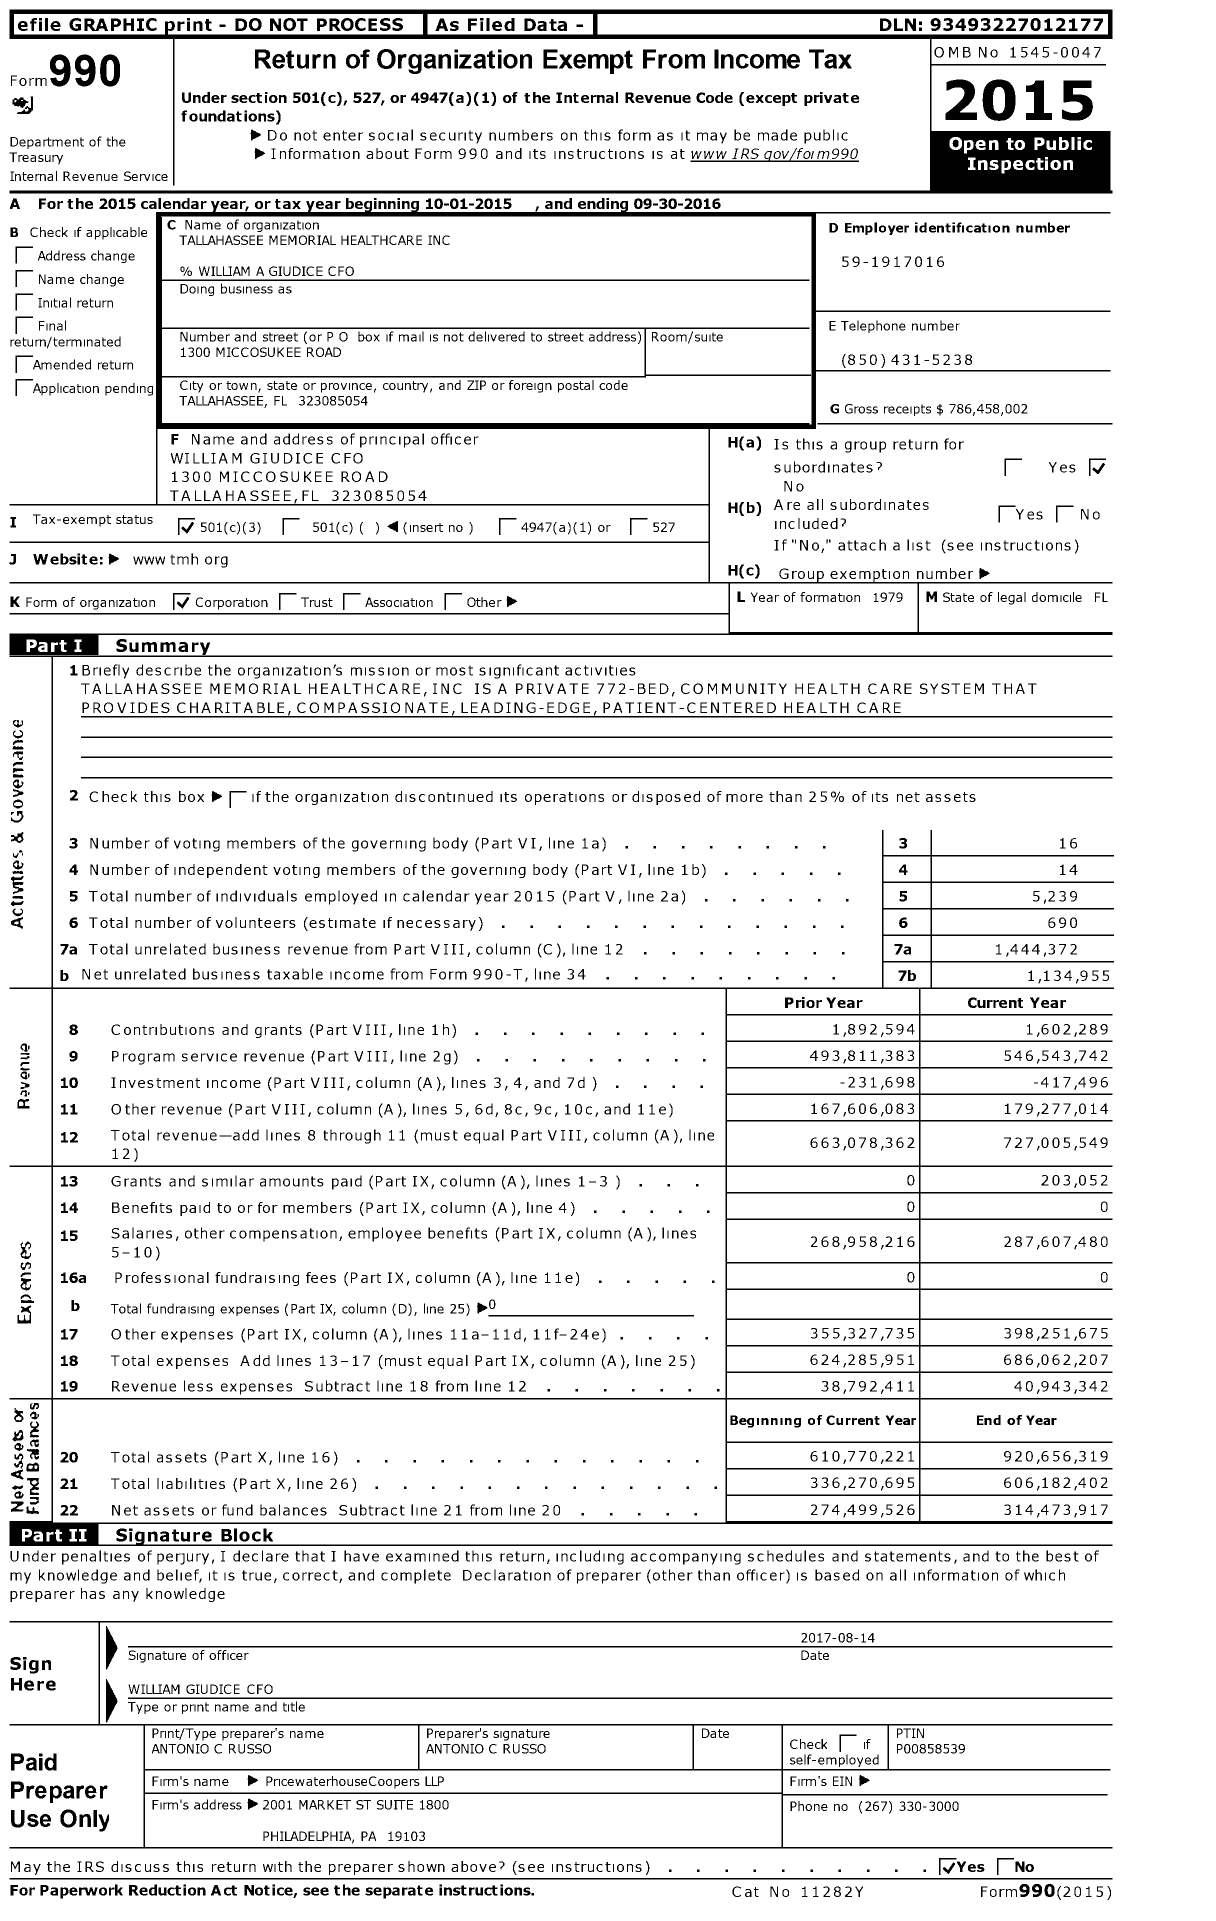 Image of first page of 2015 Form 990 for Tallahassee Memorial HealthCare (TMH)